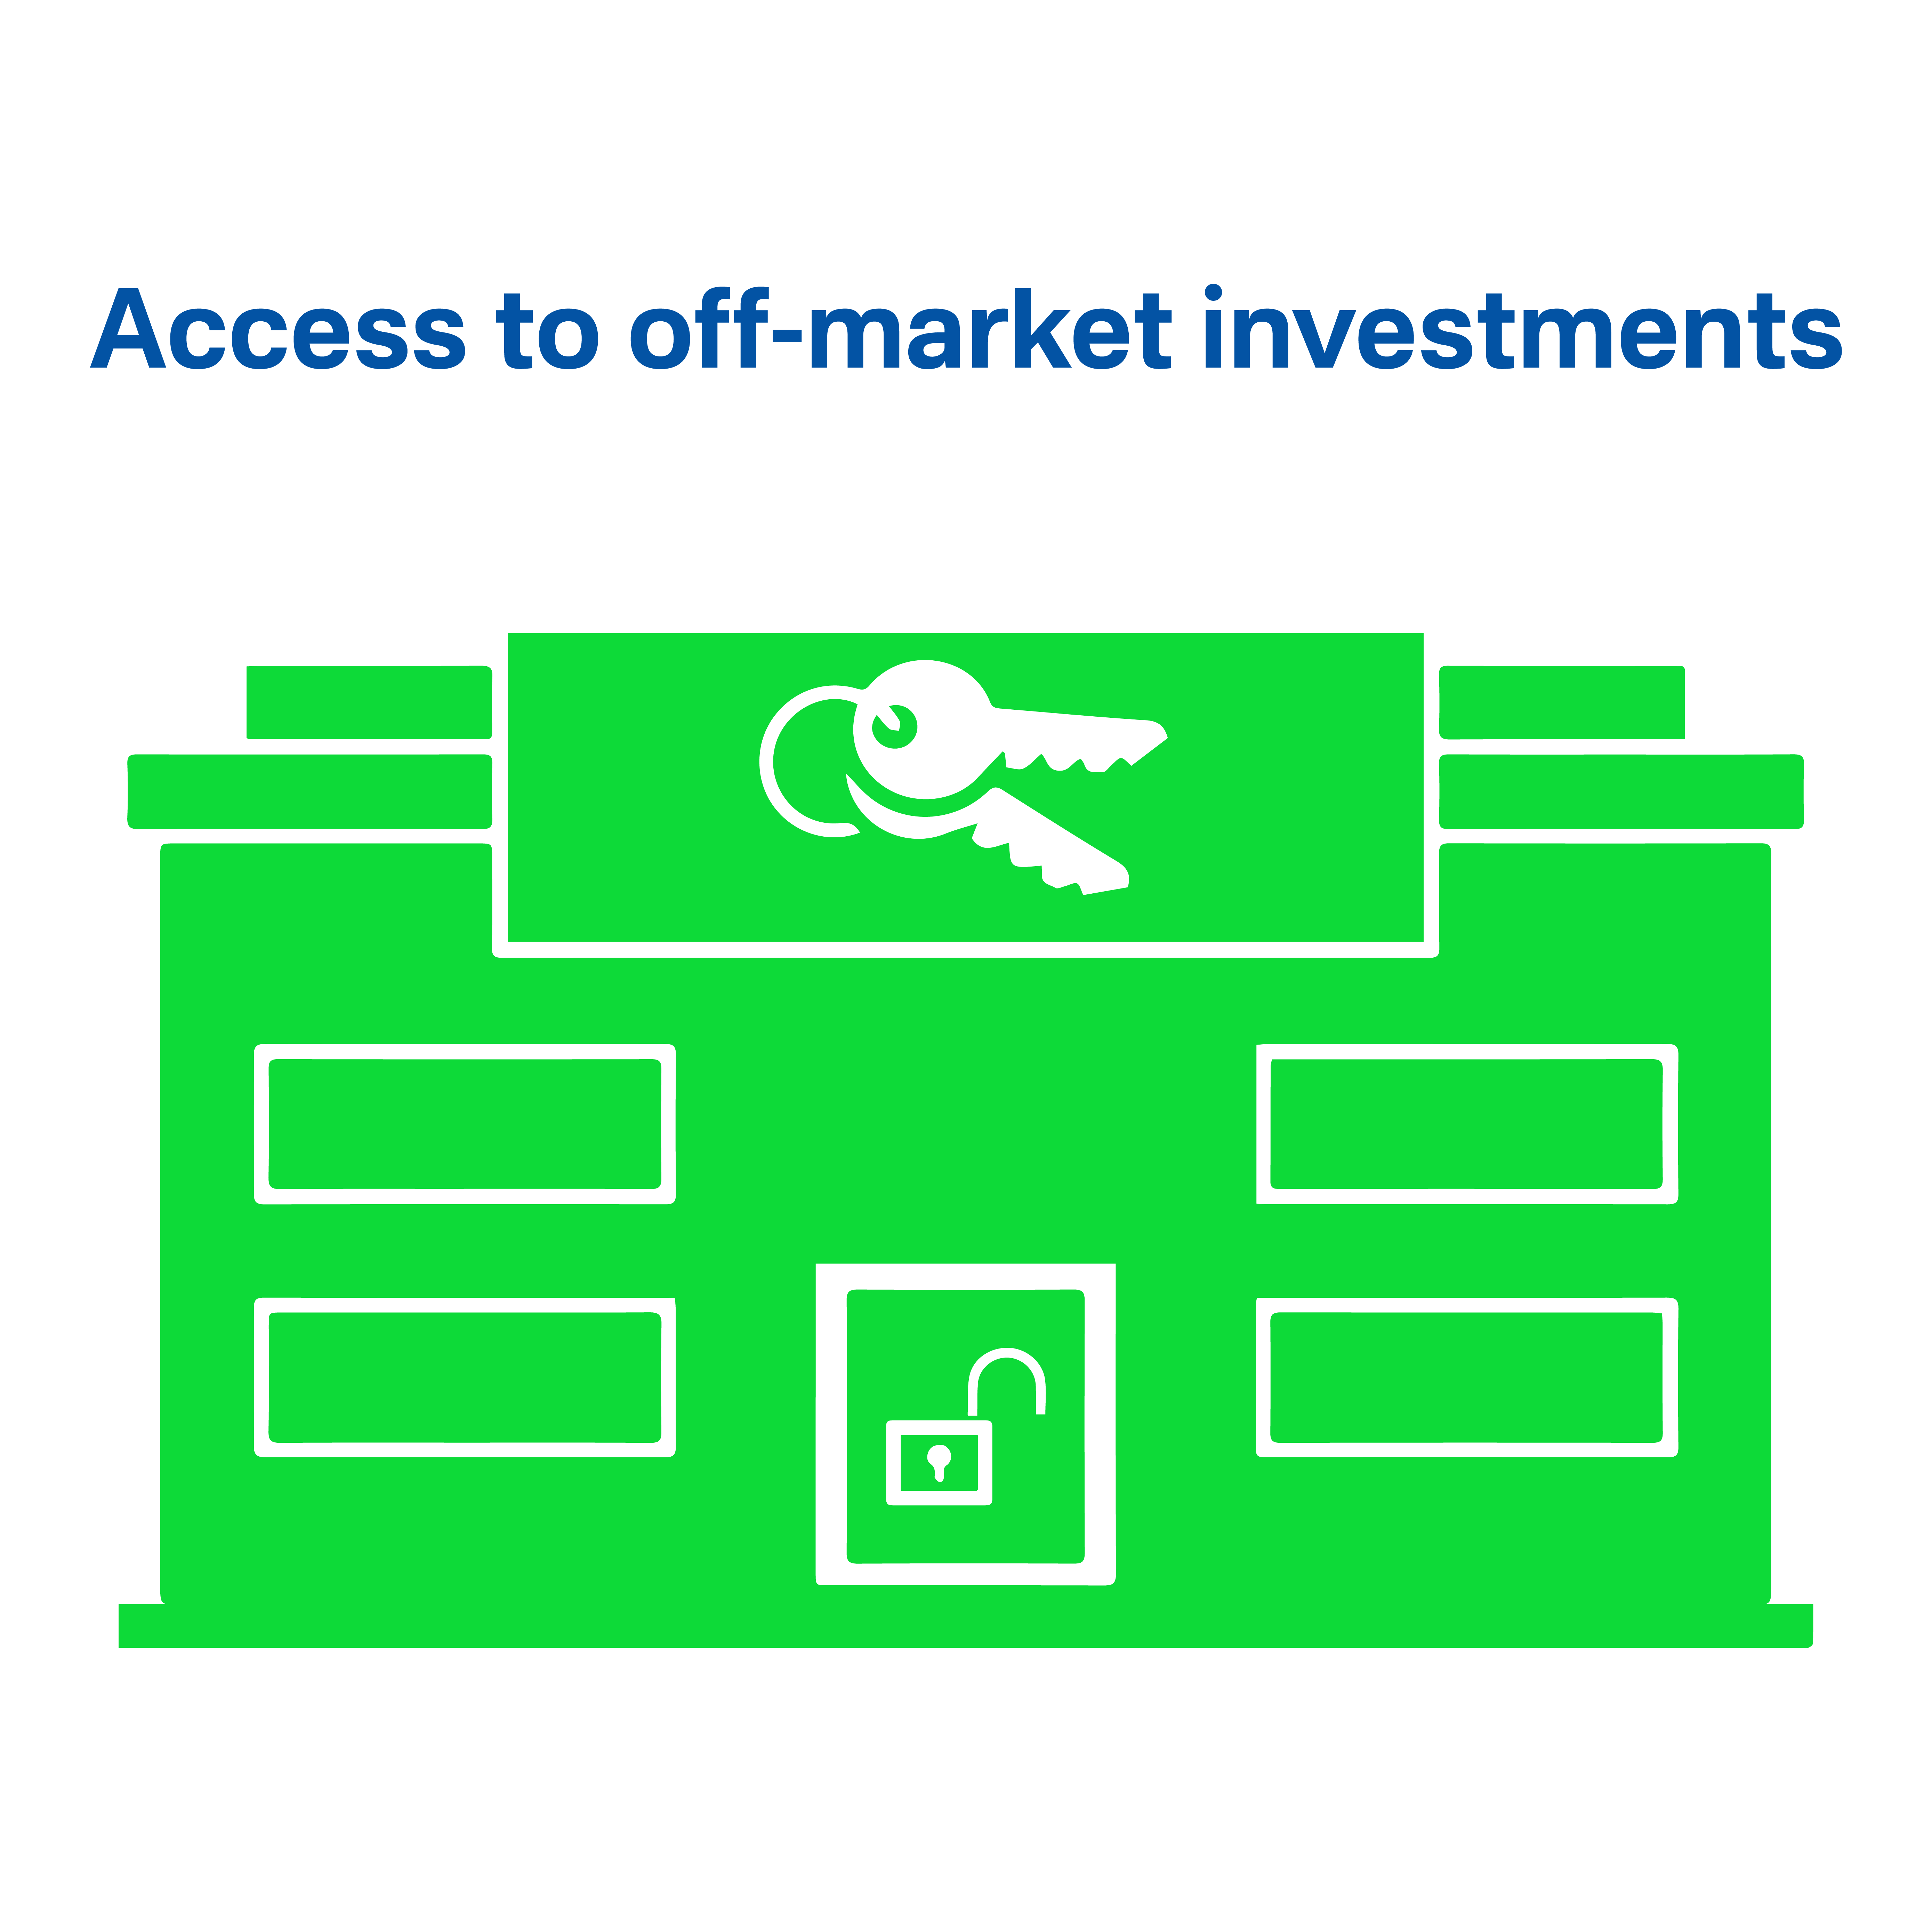 Access to off-market investments